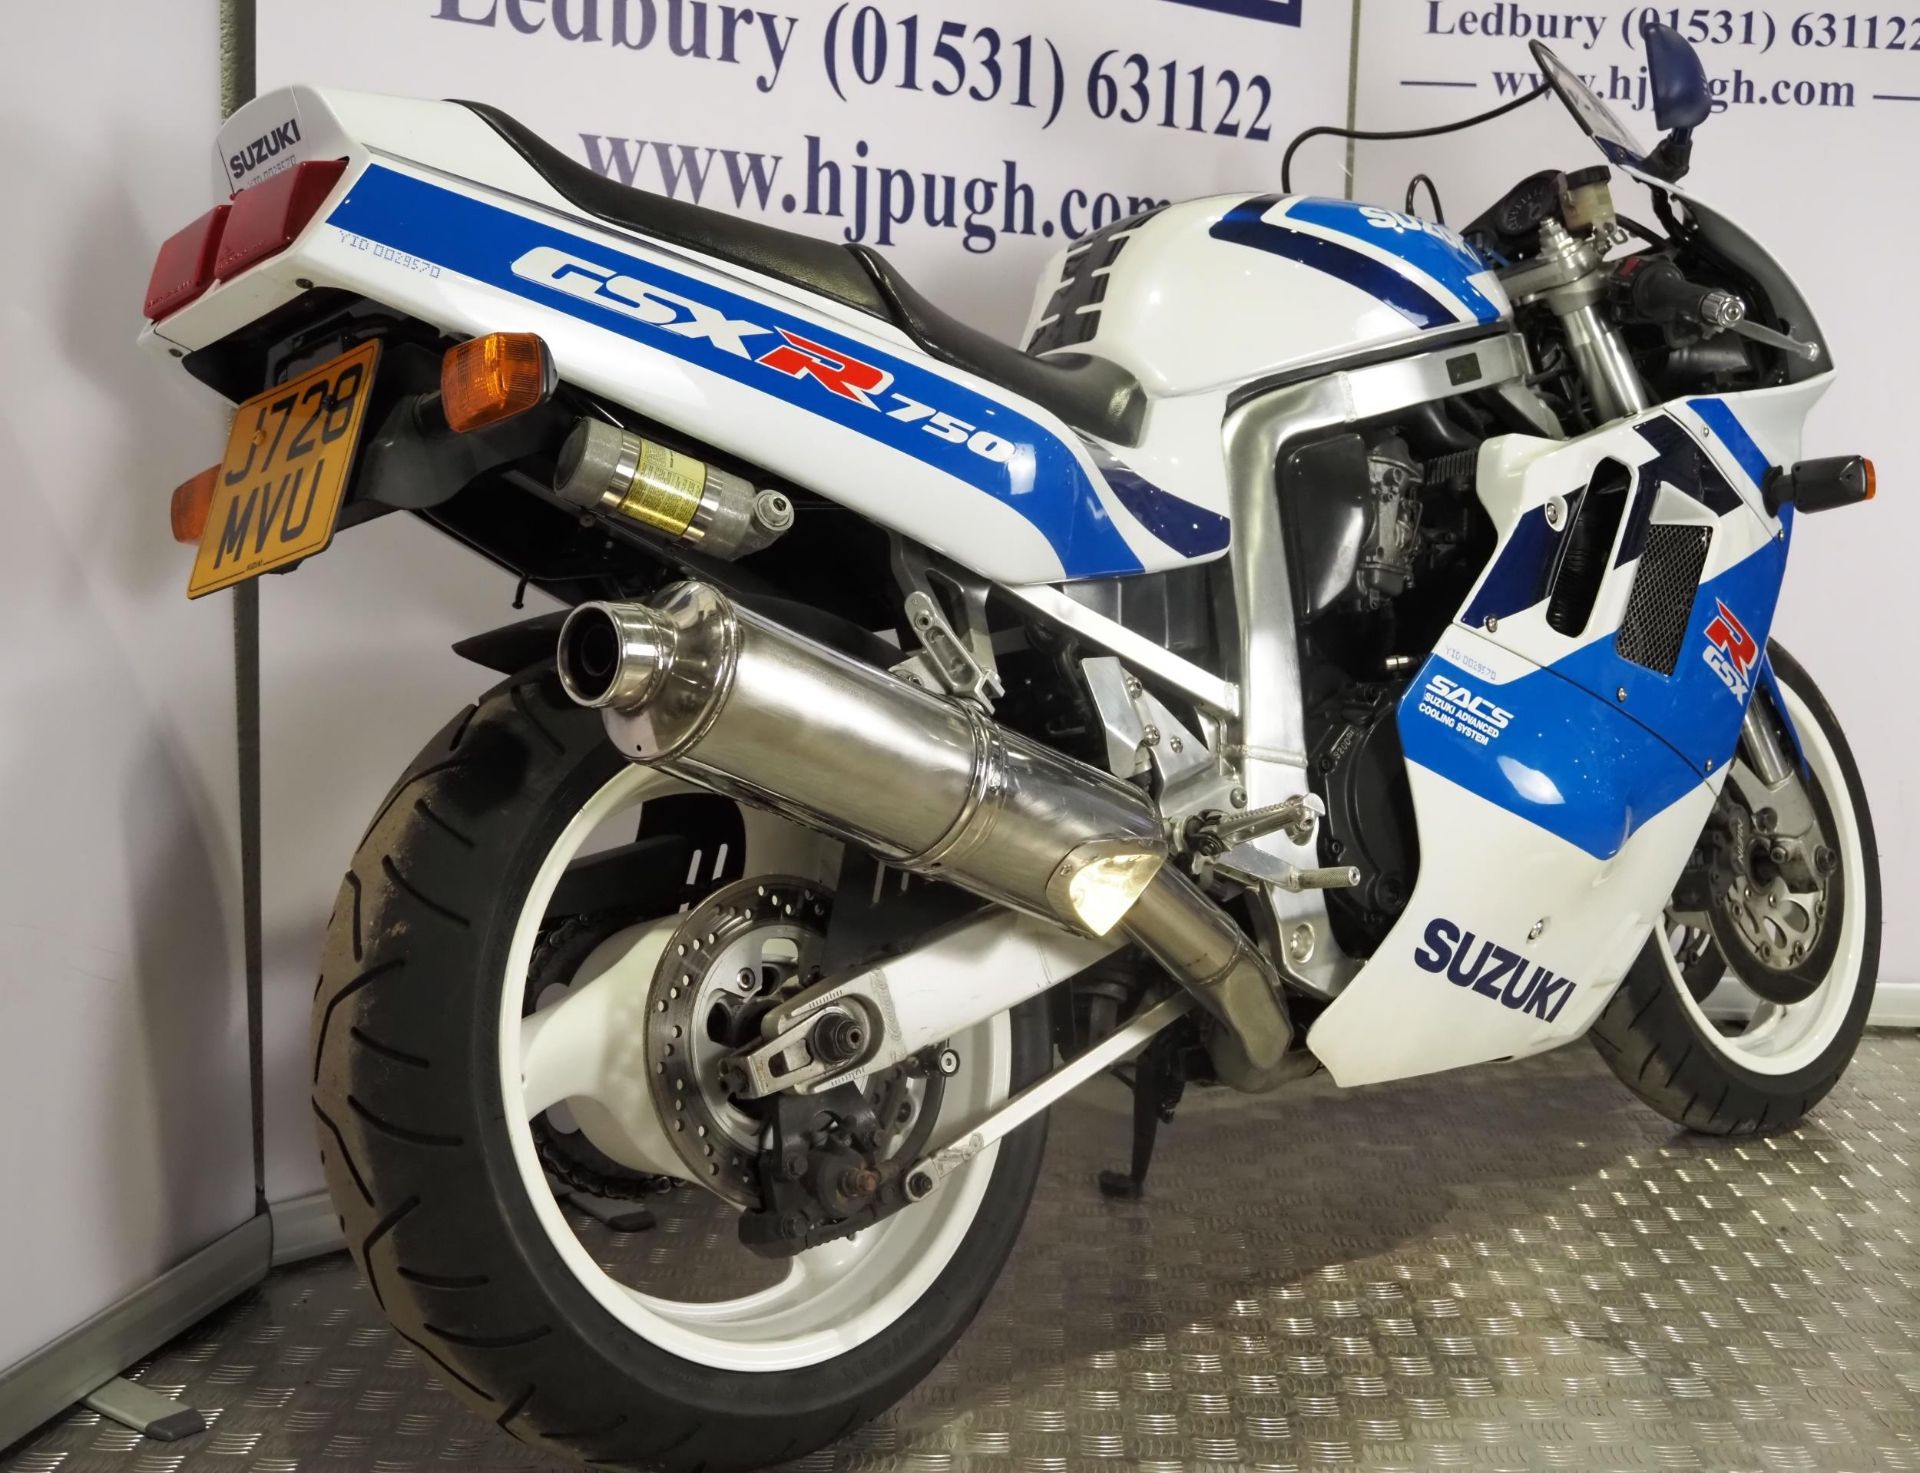 Suzuki GSXR750 motorcycle. 1991. 749cc Runs and rides but has been on display for several years so - Image 4 of 9